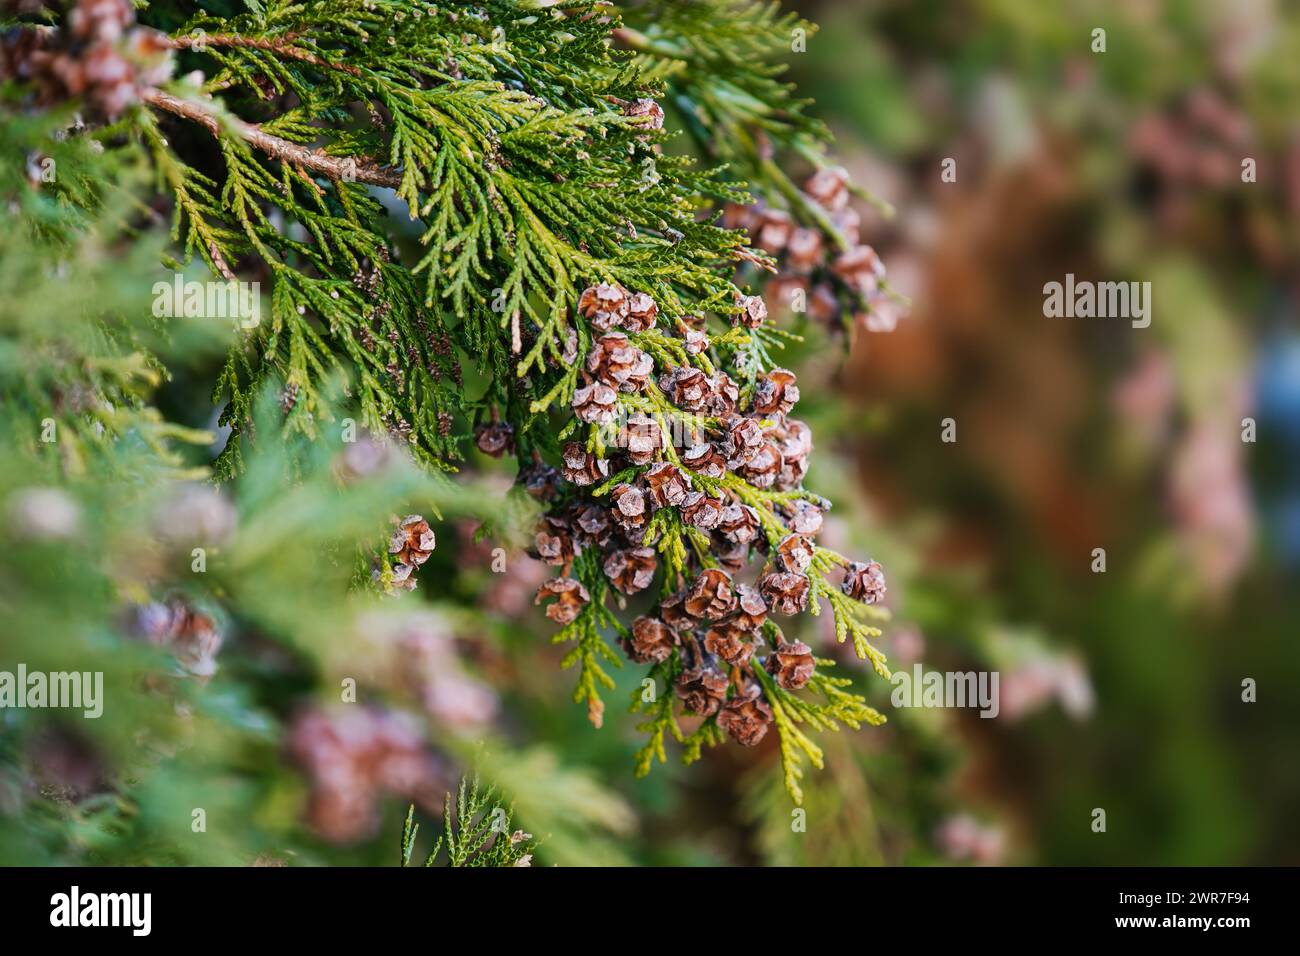 Mature female cones of Port Orford cedar. False cypress. Branche with brown dry seeds in spring. Chamaecyparis lawsoniana. Interesting nature concept Stock Photo